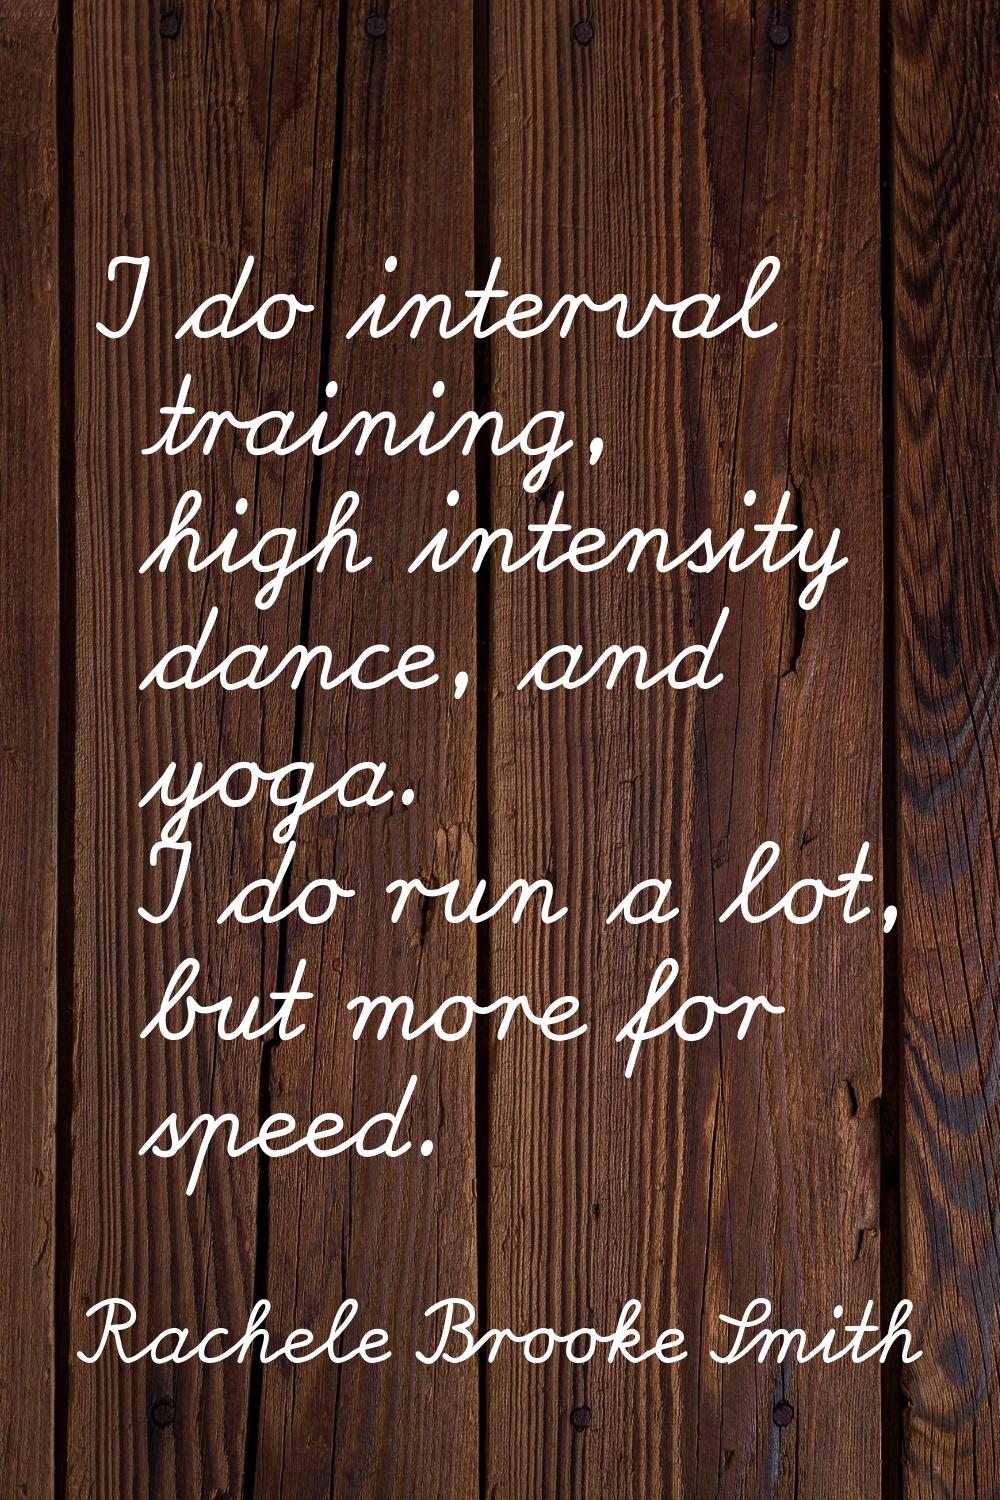 I do interval training, high intensity dance, and yoga. I do run a lot, but more for speed.